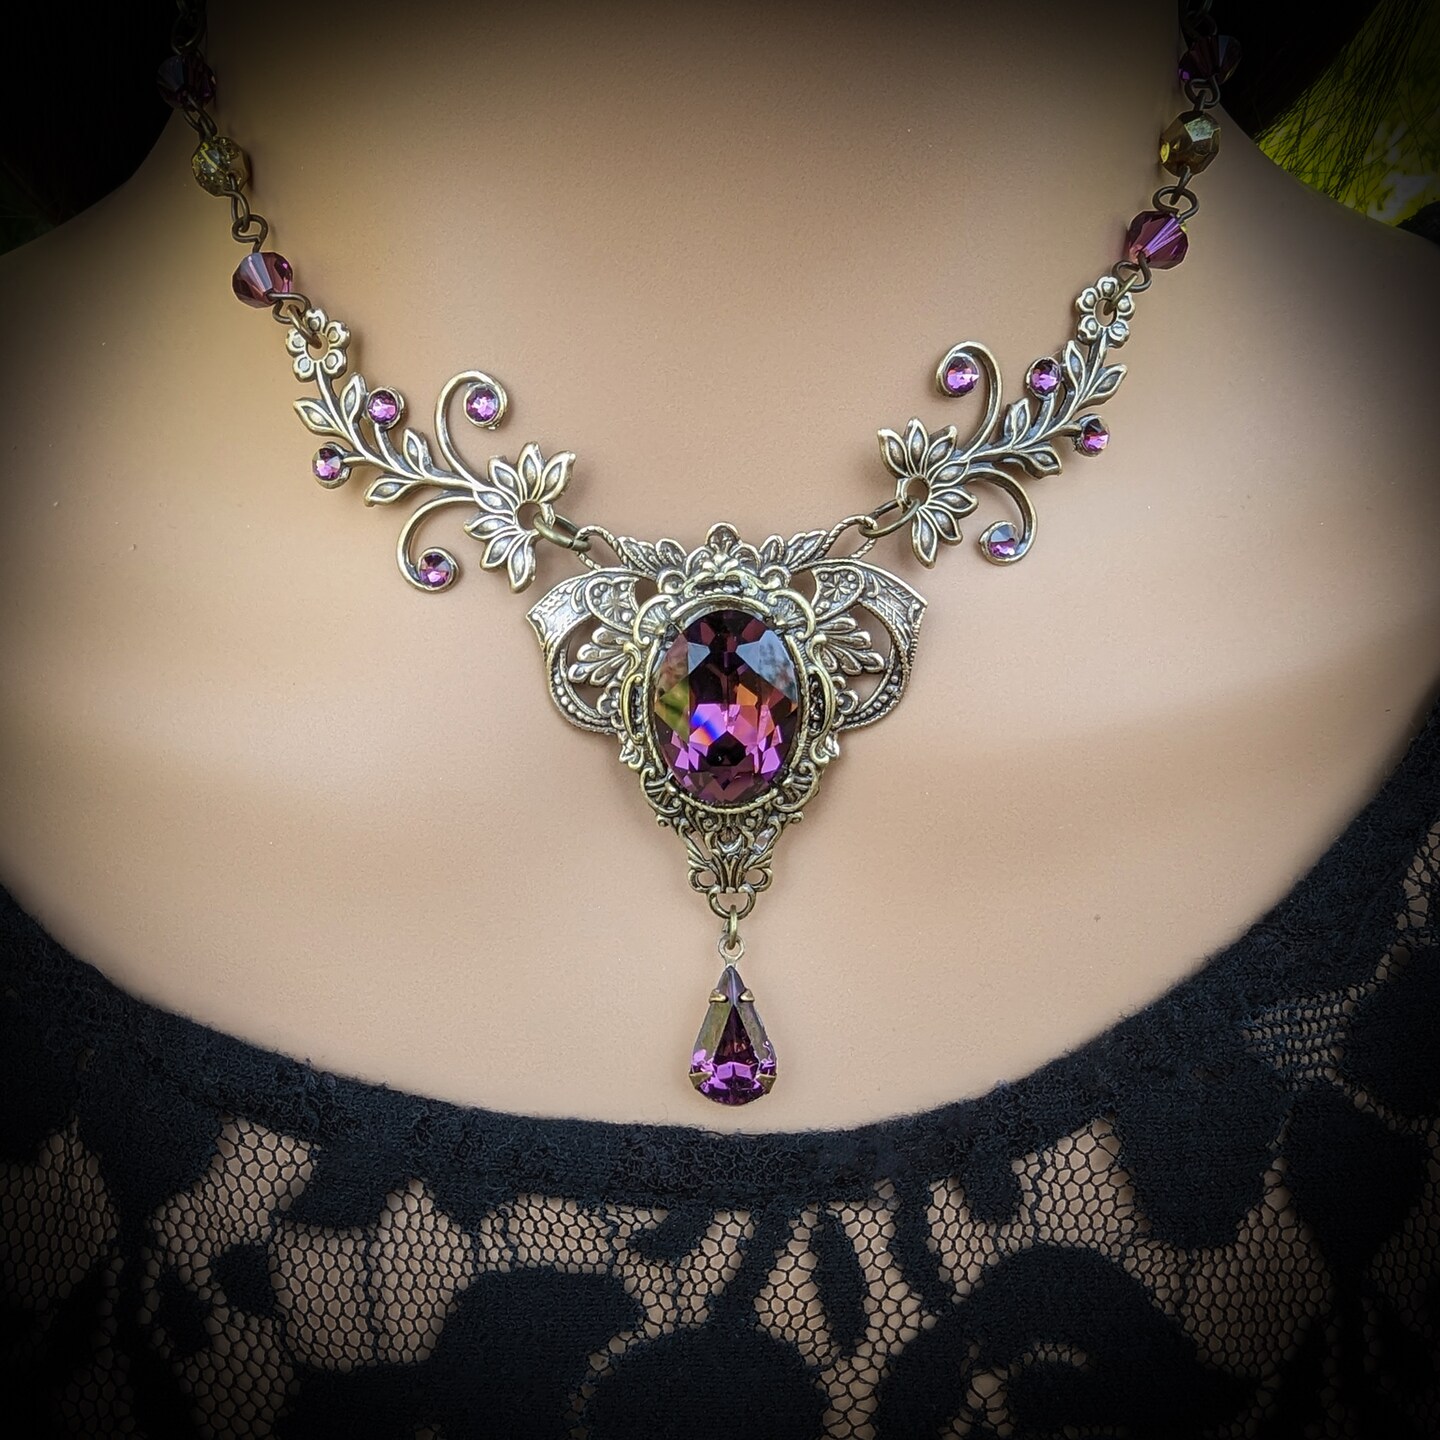 Vintage Amethyst Necklace made with Swarovski Crystals, Medieval Jewelry,  Elvish Jewelry, Dark Fantasy Necklace | MakerPlace by Michaels